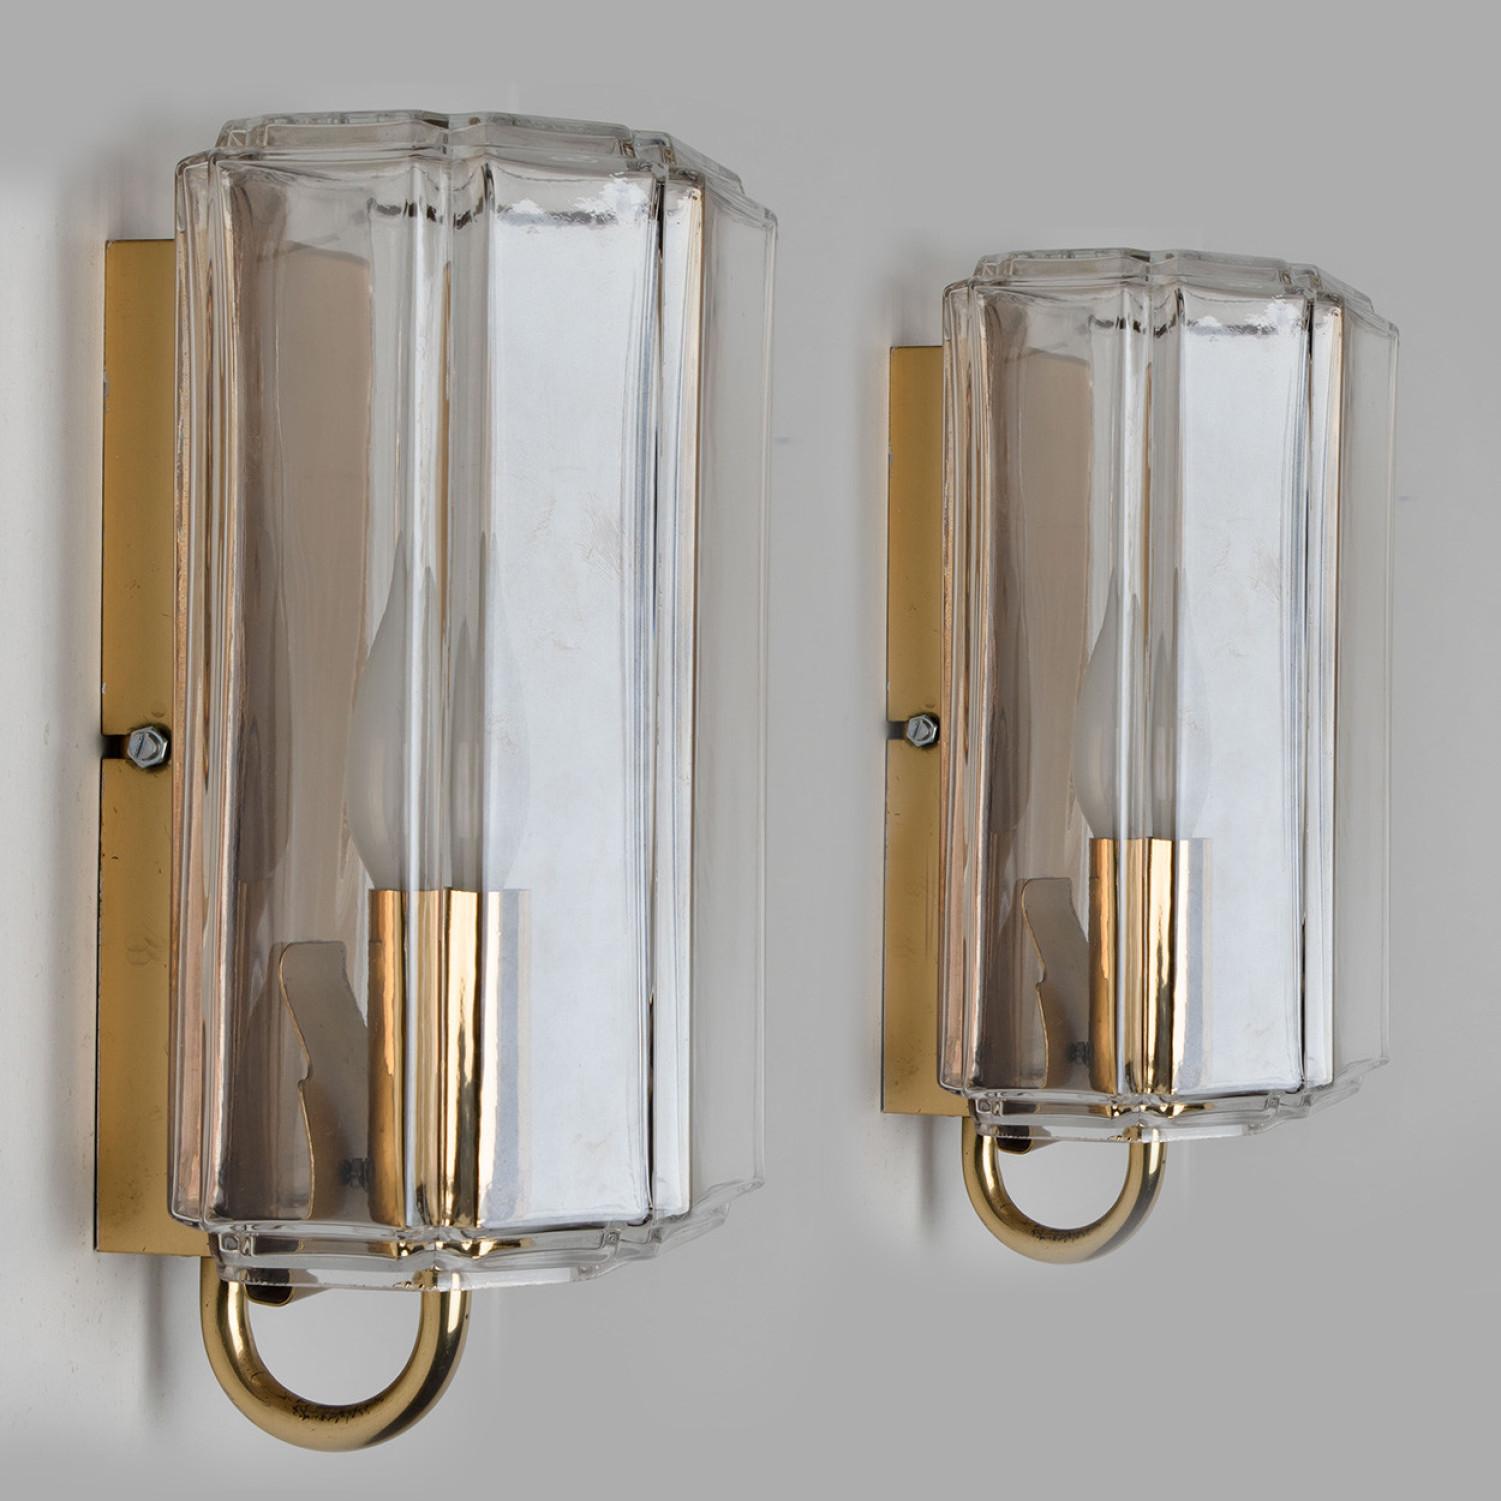 This beautiful set of hand blown glass wall lights were manufactured by Glashütte Limburg in Germany during the 1960s (late 1960s-early 1970s). Beautiful craftsmanship. These midcentury vintage lights feature handmade, elaborate lightly smoked glass